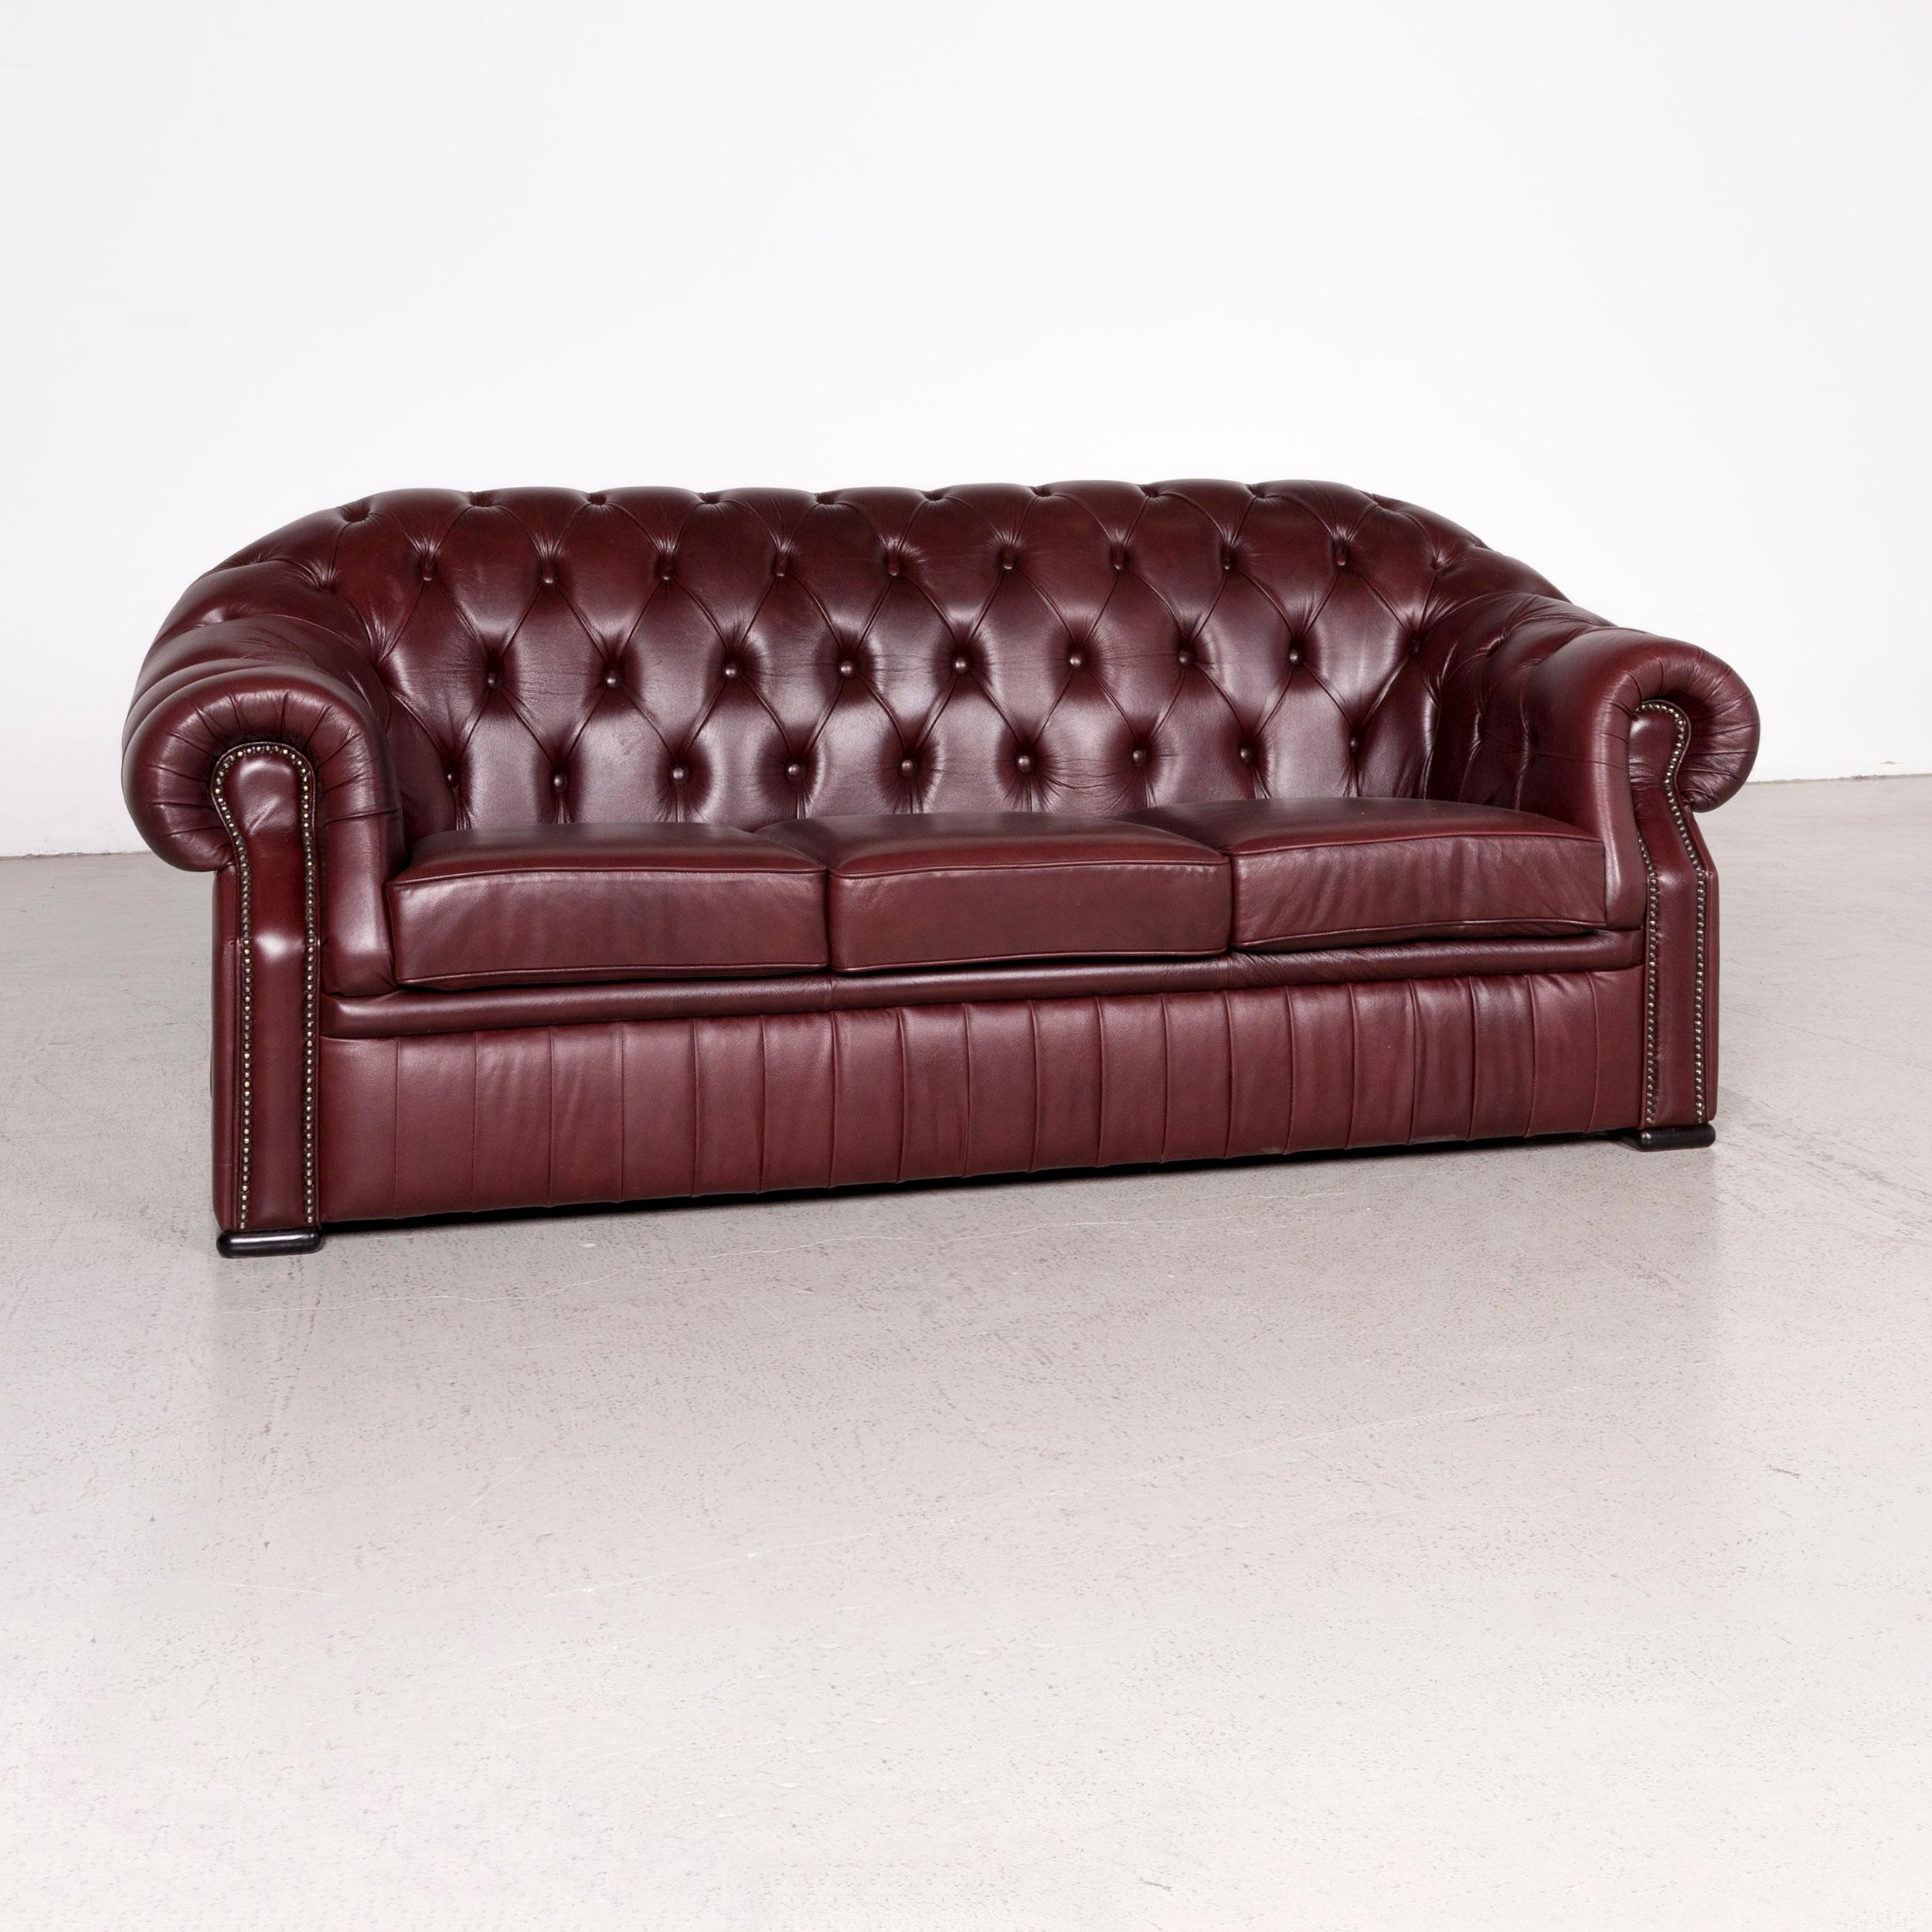 We bring to you a Chesterfield leather sofa red genuine leather three-seat couch vintage retro.
 

Product measures in centimeters:

Depth: 95
Width: 210
Height: 85
Seat-height: 45
Rest-height: 65
Seat-depth: 55
Seat-width: